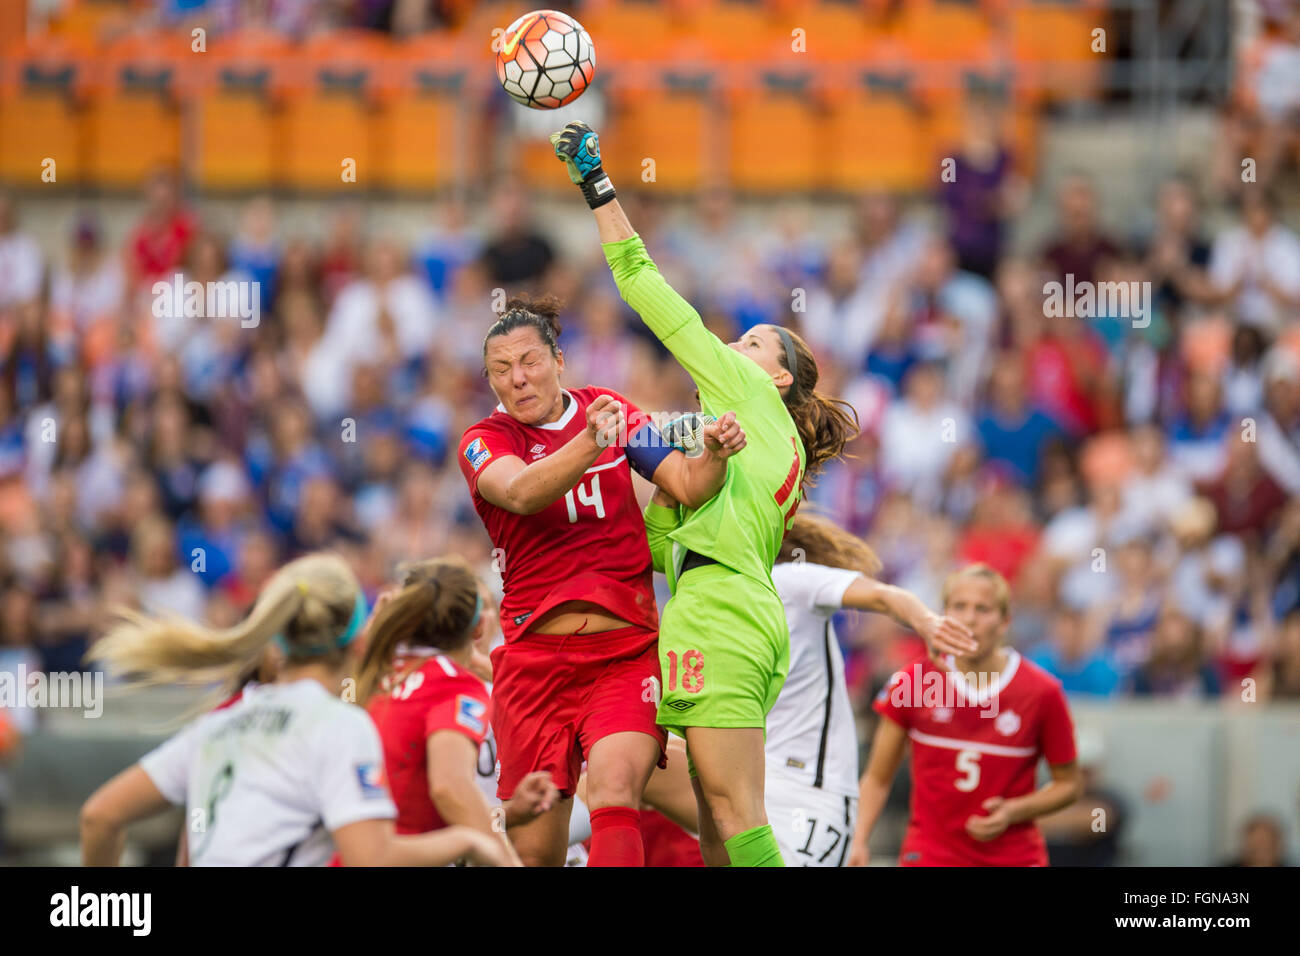 Houston, TX, USA. 21st Feb, 2016. Canada goalkeeper Stephanie Labbe (18) punches the ball away past Canada forward Melissa Tancredi (14) following a US corner kick during the Final match of the CONCACAF Olympic Qualifying tournament between Canada and the USA at BBVA Compass Stadium in Houston, TX. USA won 2-0.Trask Smith/CSM/Alamy Live News Stock Photo